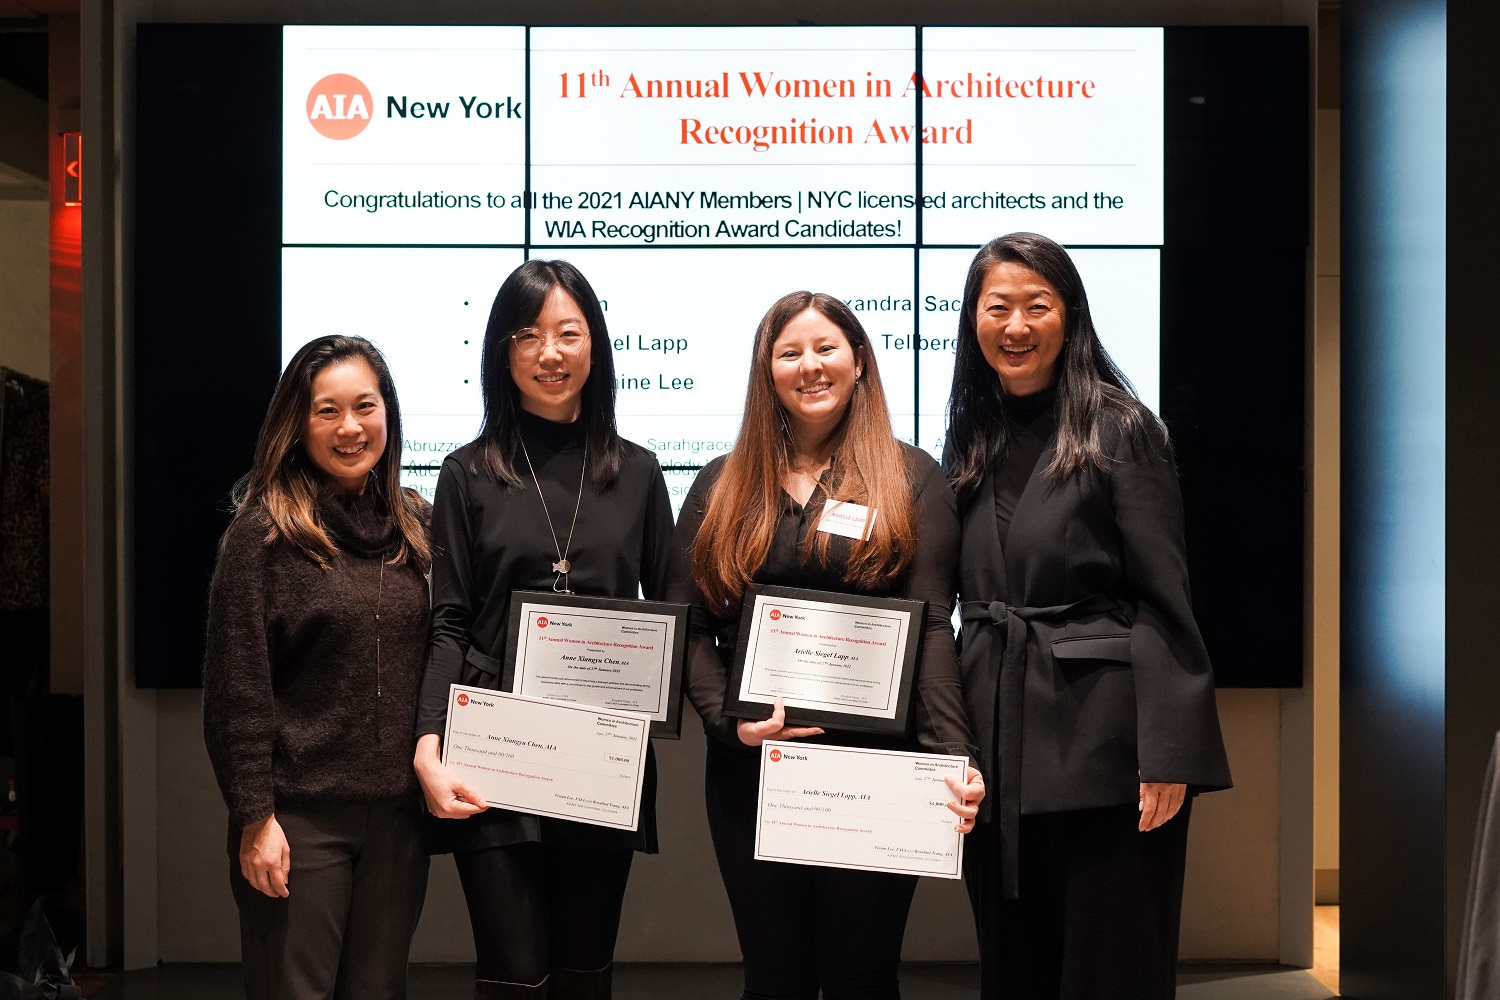 Four women posing for a photo and holding award certificates at the 11th Annual WIA Recognition Award